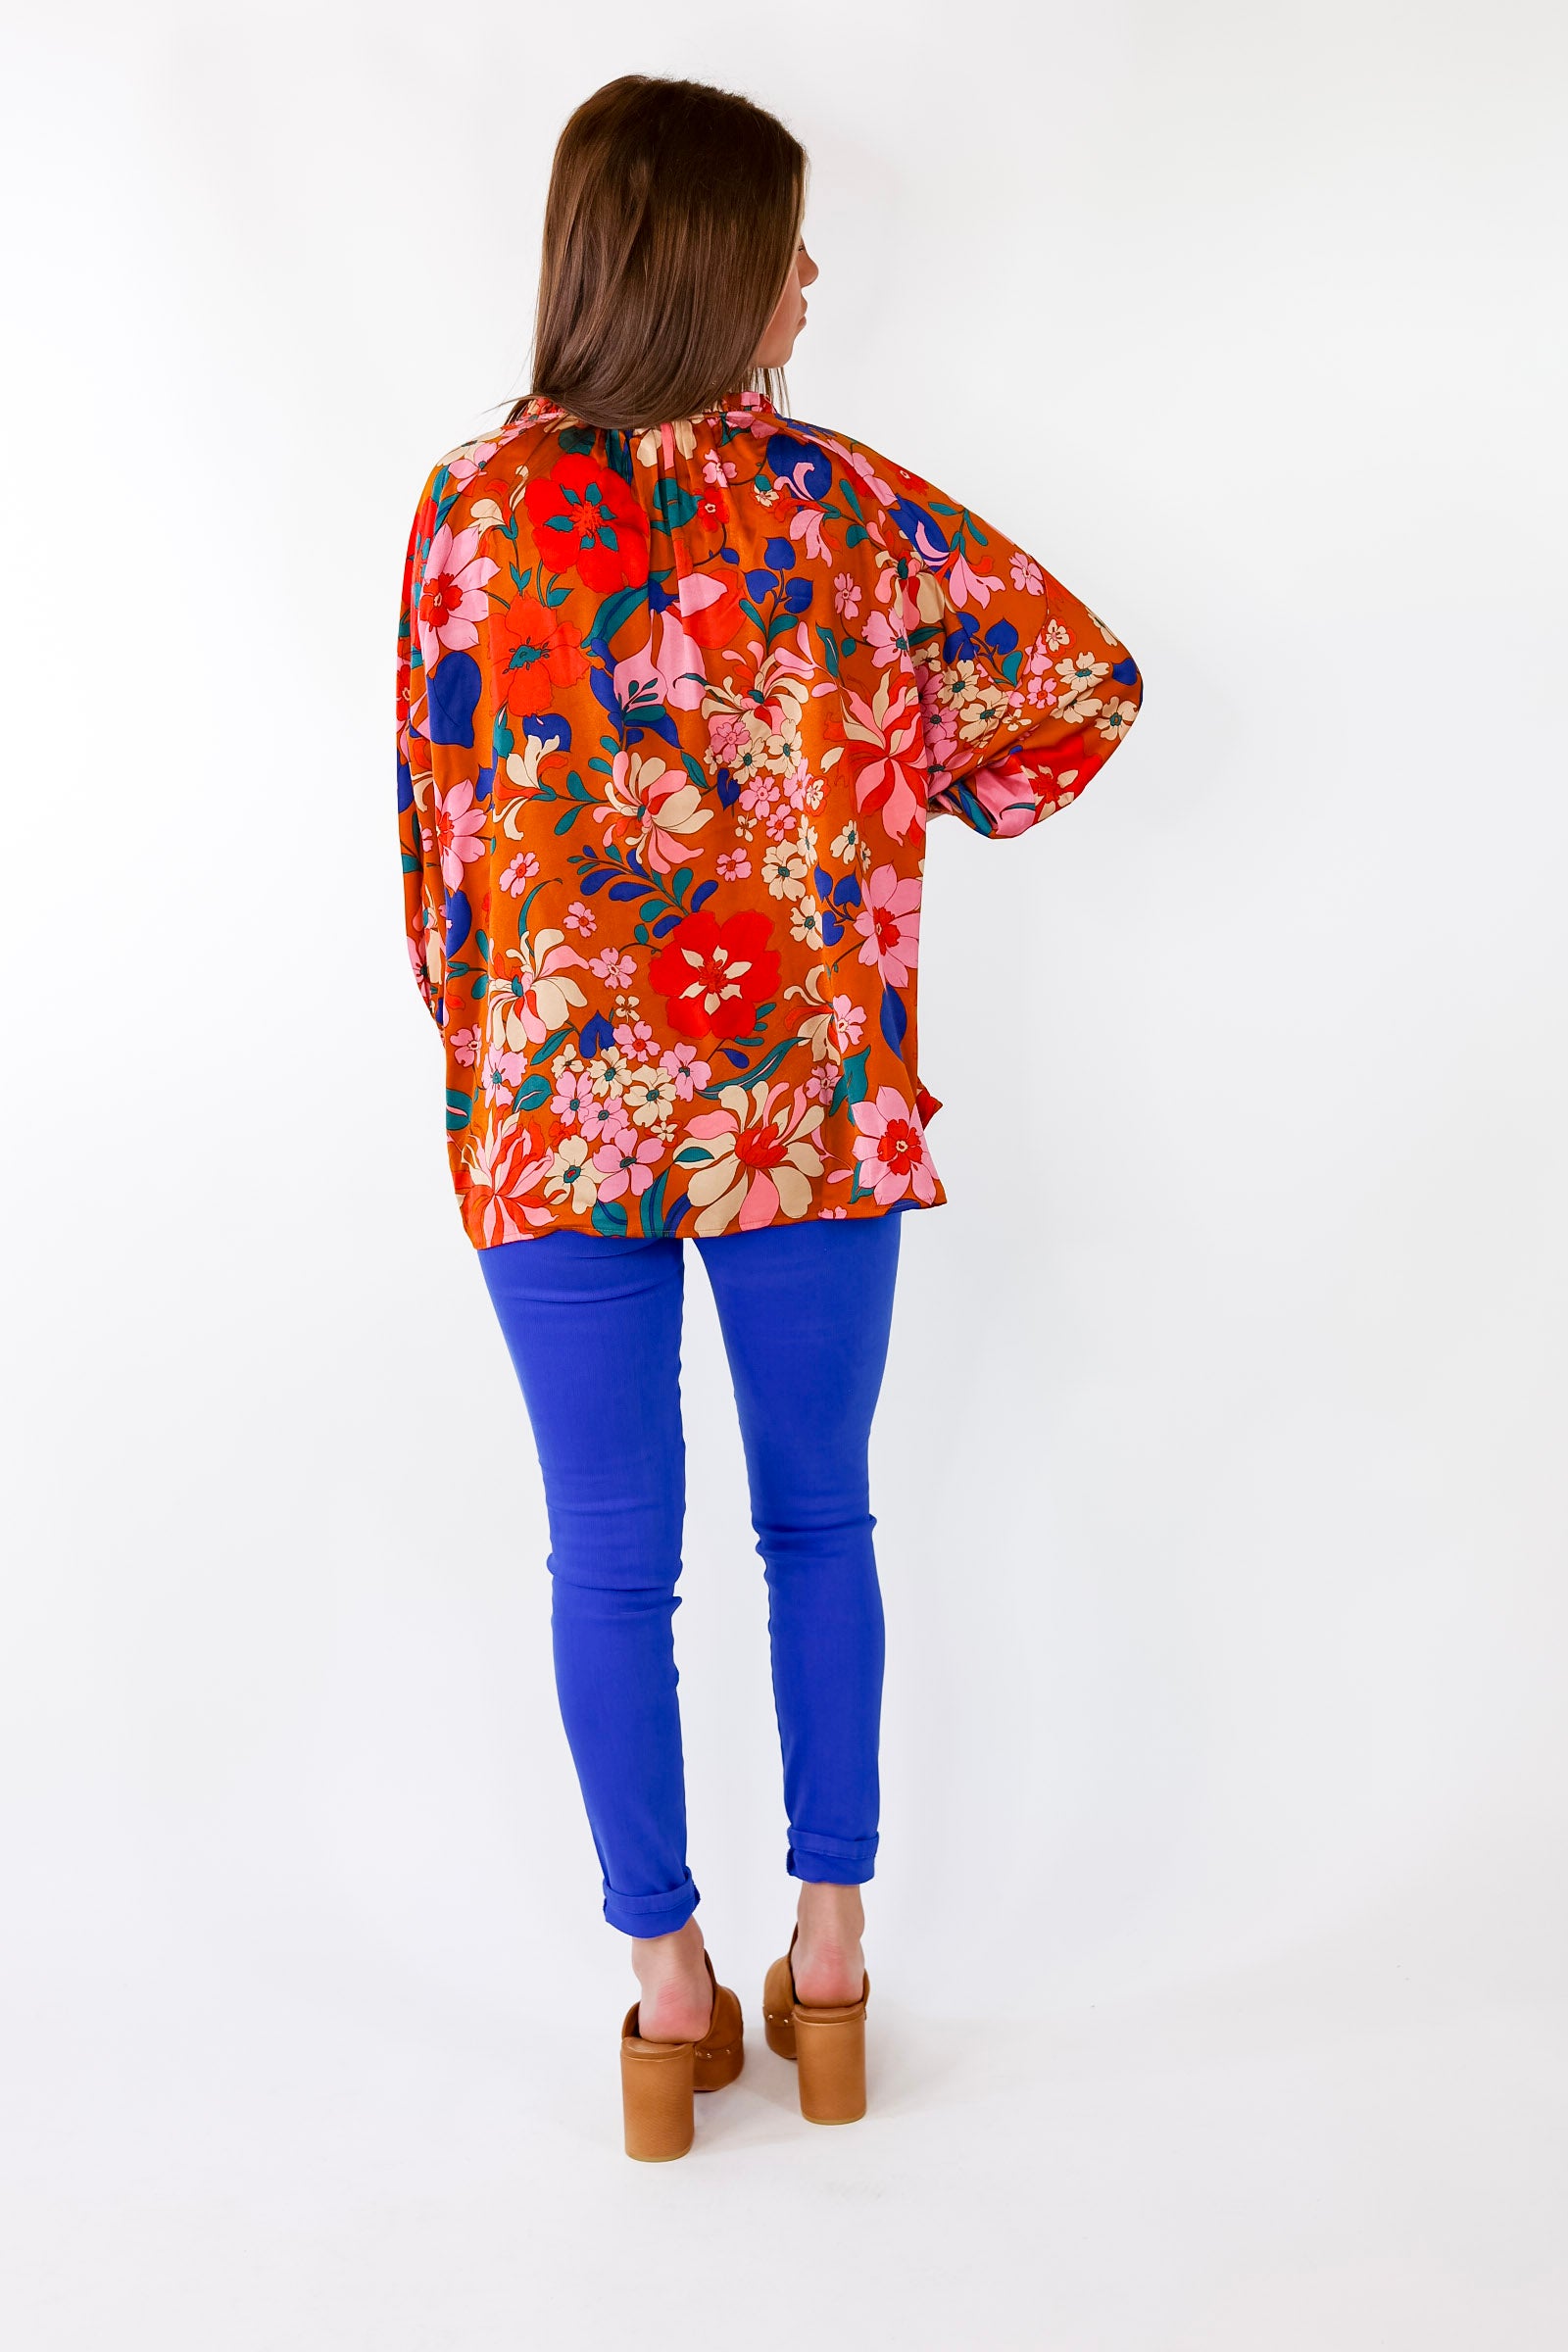 Falling For Floral 3/4 Sleeve Top with Notched Neck in Camel Brown - Giddy Up Glamour Boutique